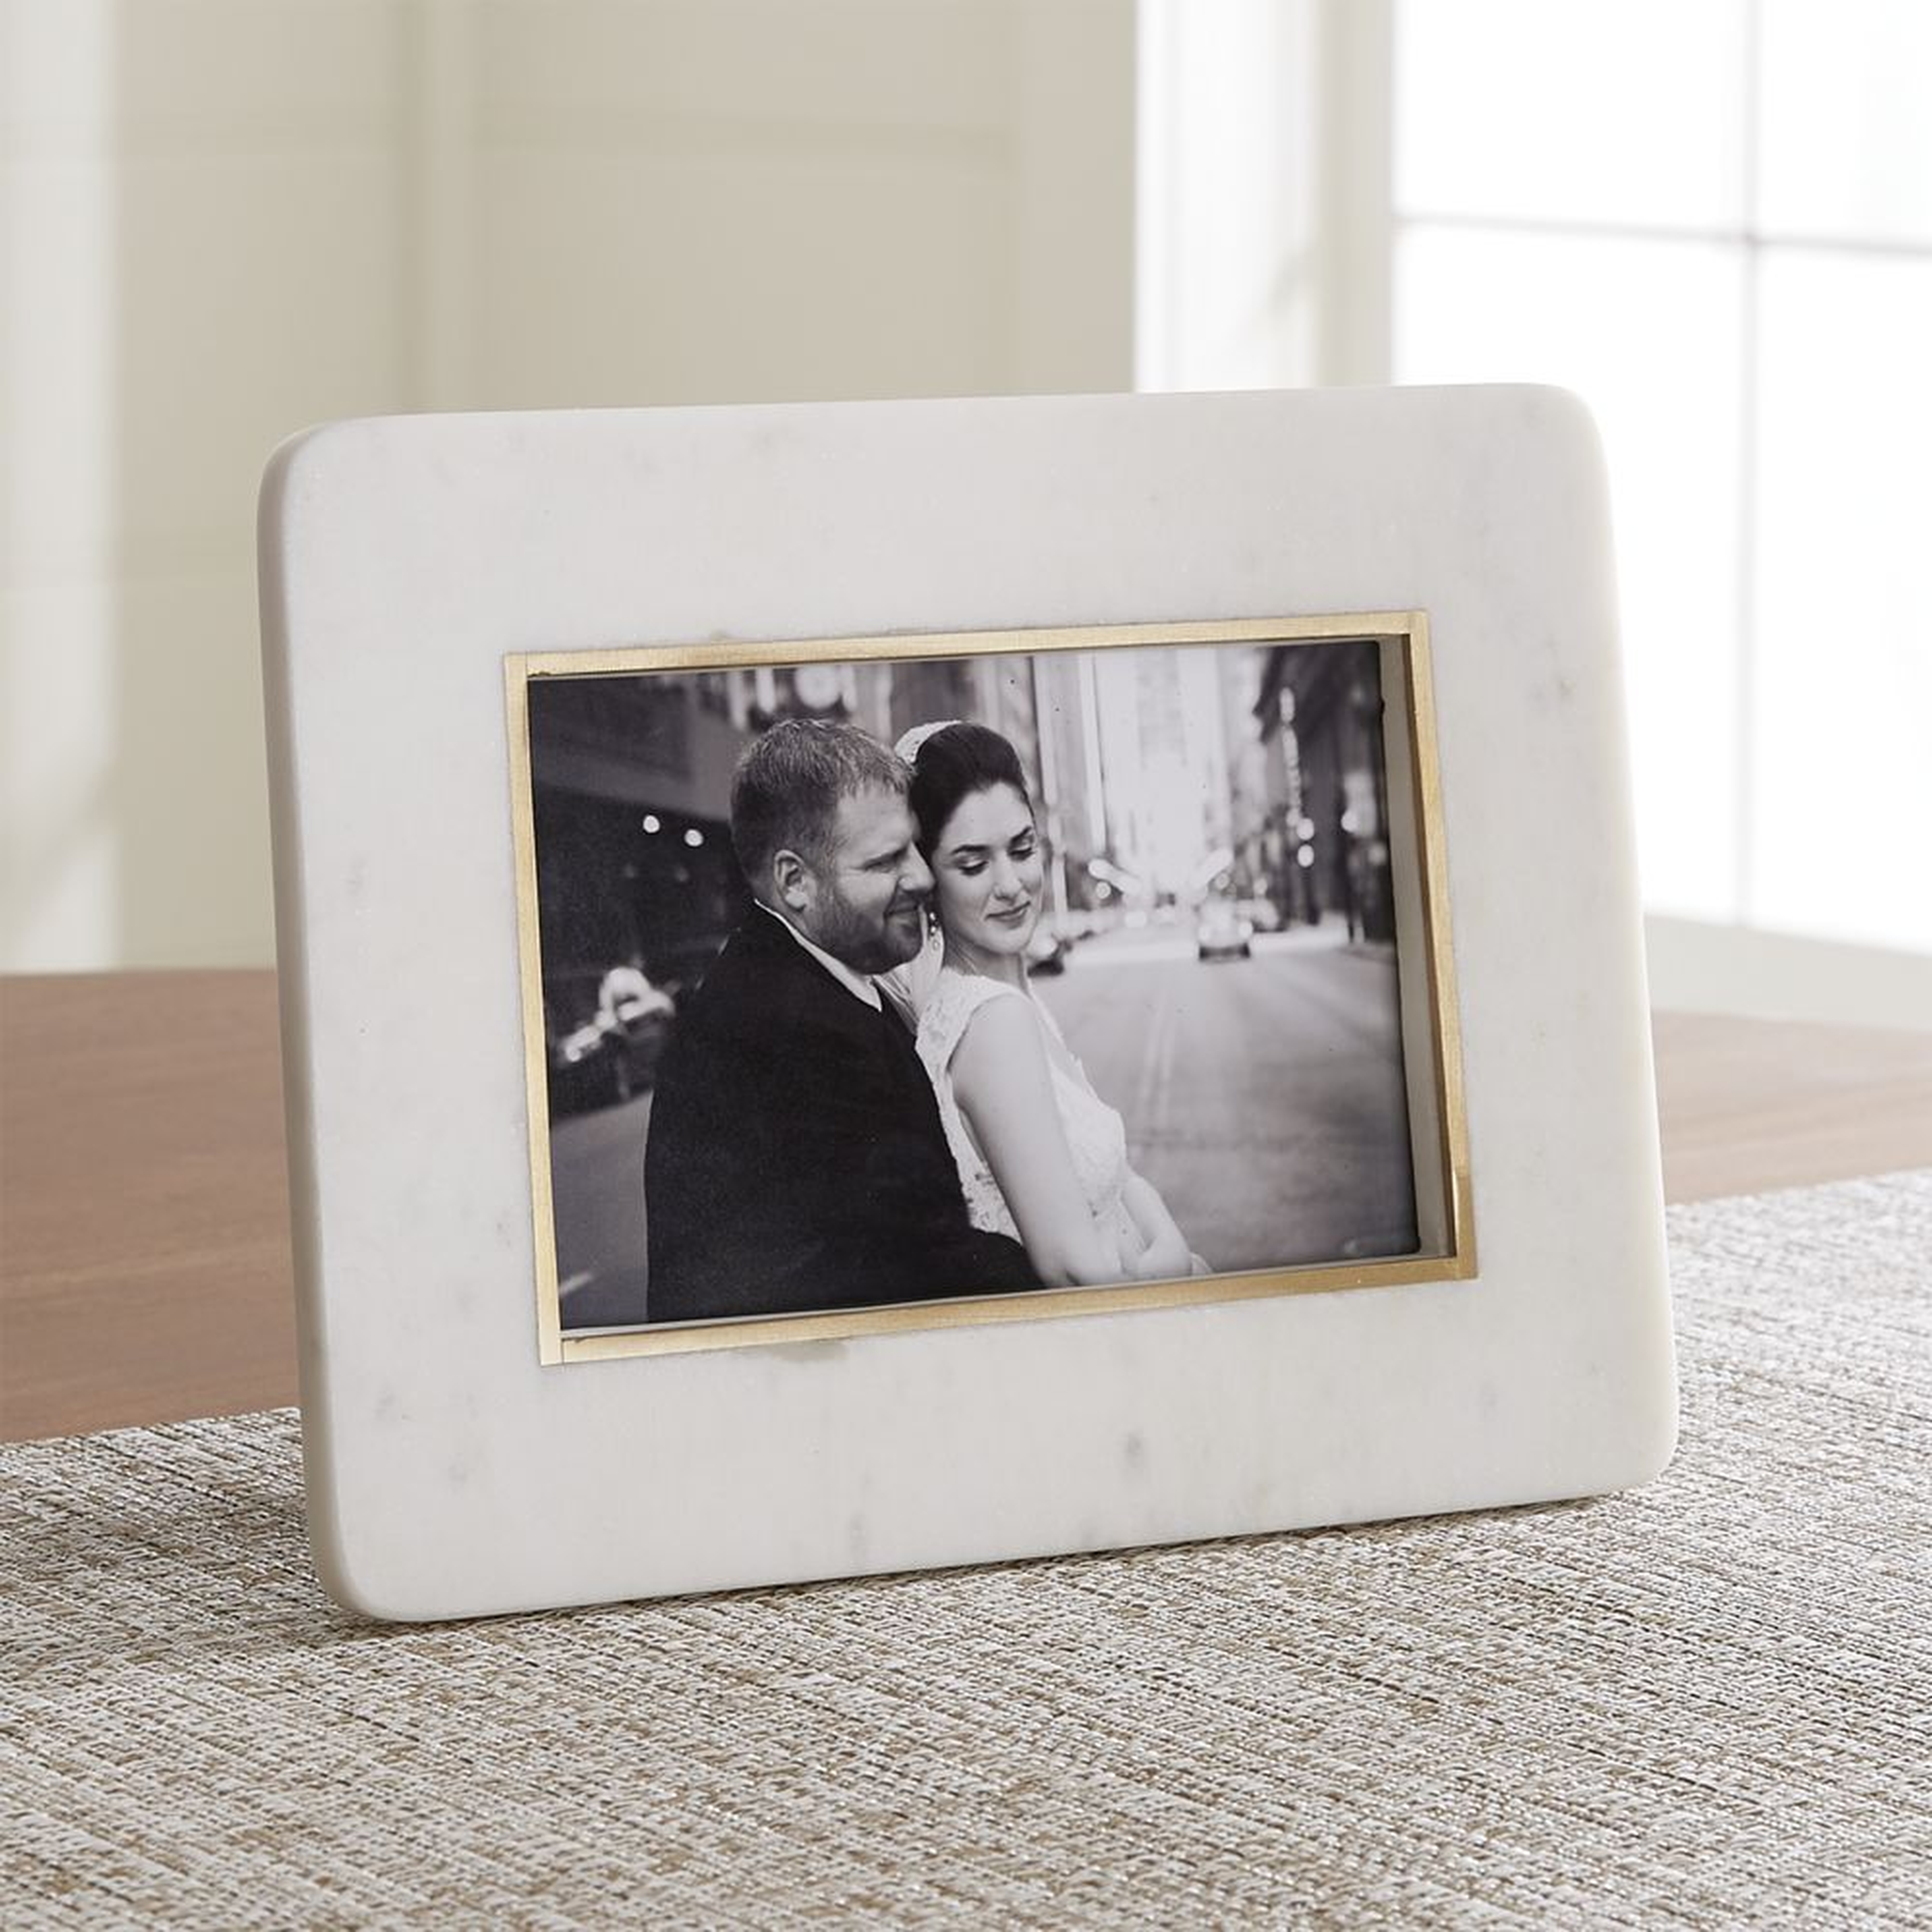 5"x7" White Marble Picture Frame - Crate and Barrel